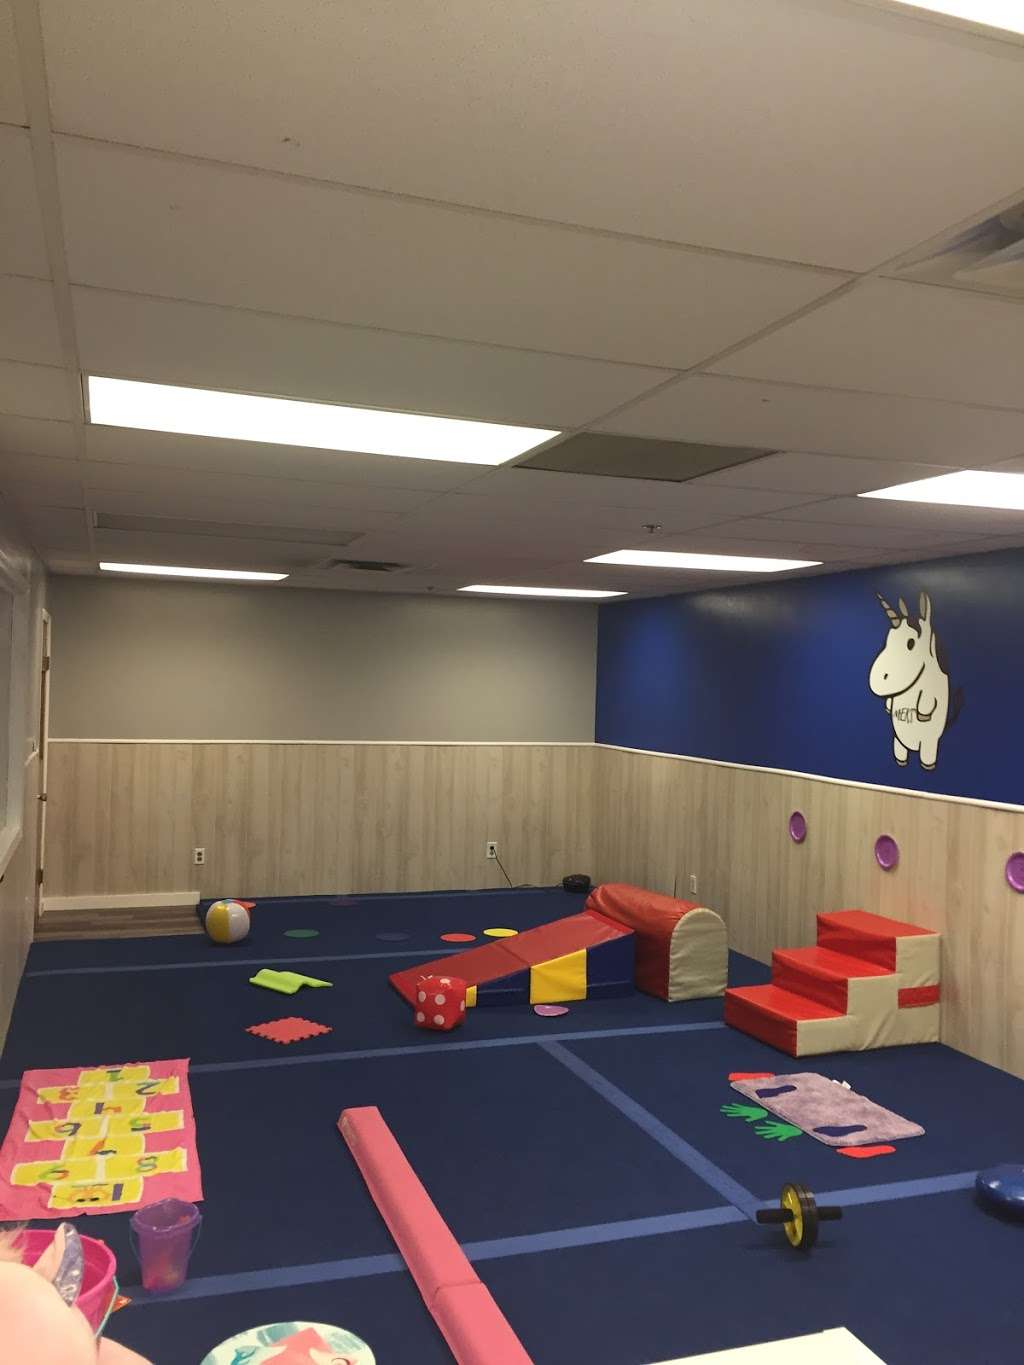 Meks Gymnastic Academy | 1735 W 53rd St, Anderson, IN 46013 | Phone: (765) 400-2220